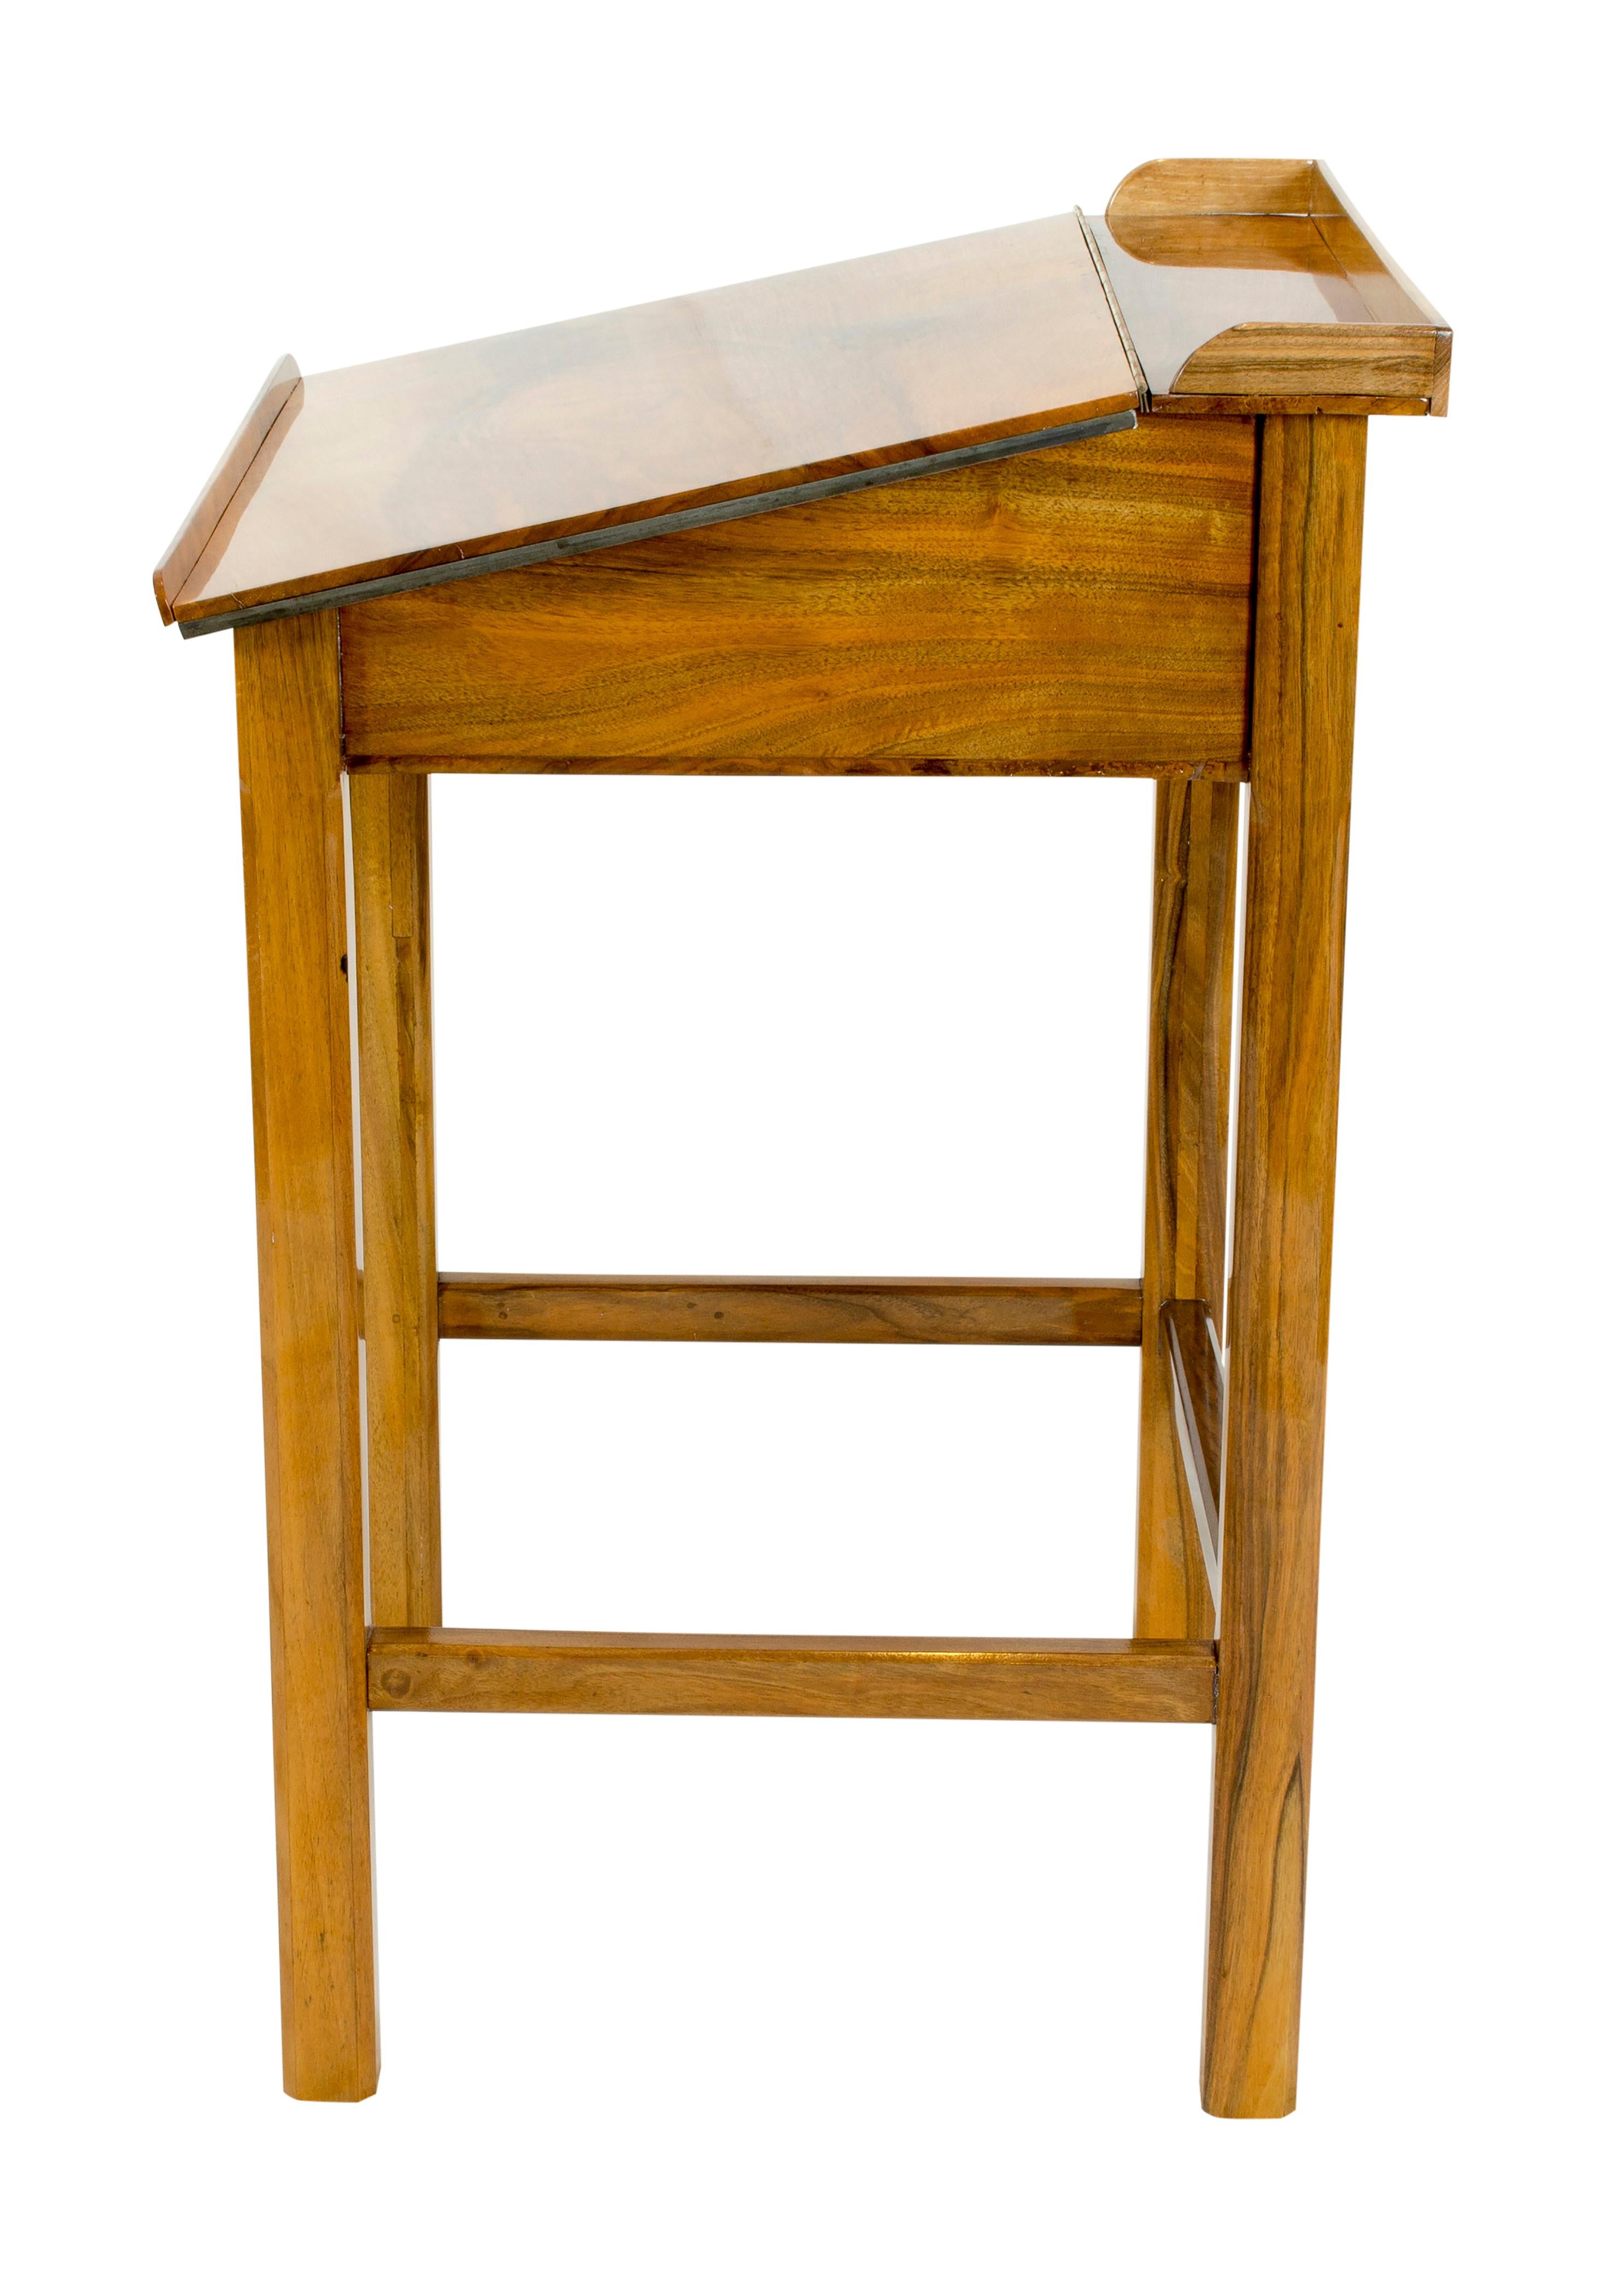 The writing desk is made of solid walnut wood. The desk is from circa 1925 and can be opened with a storage compartment. The foldable writing board is weighted on the underside with iron weights on the edge, so that the base for writing is extremely